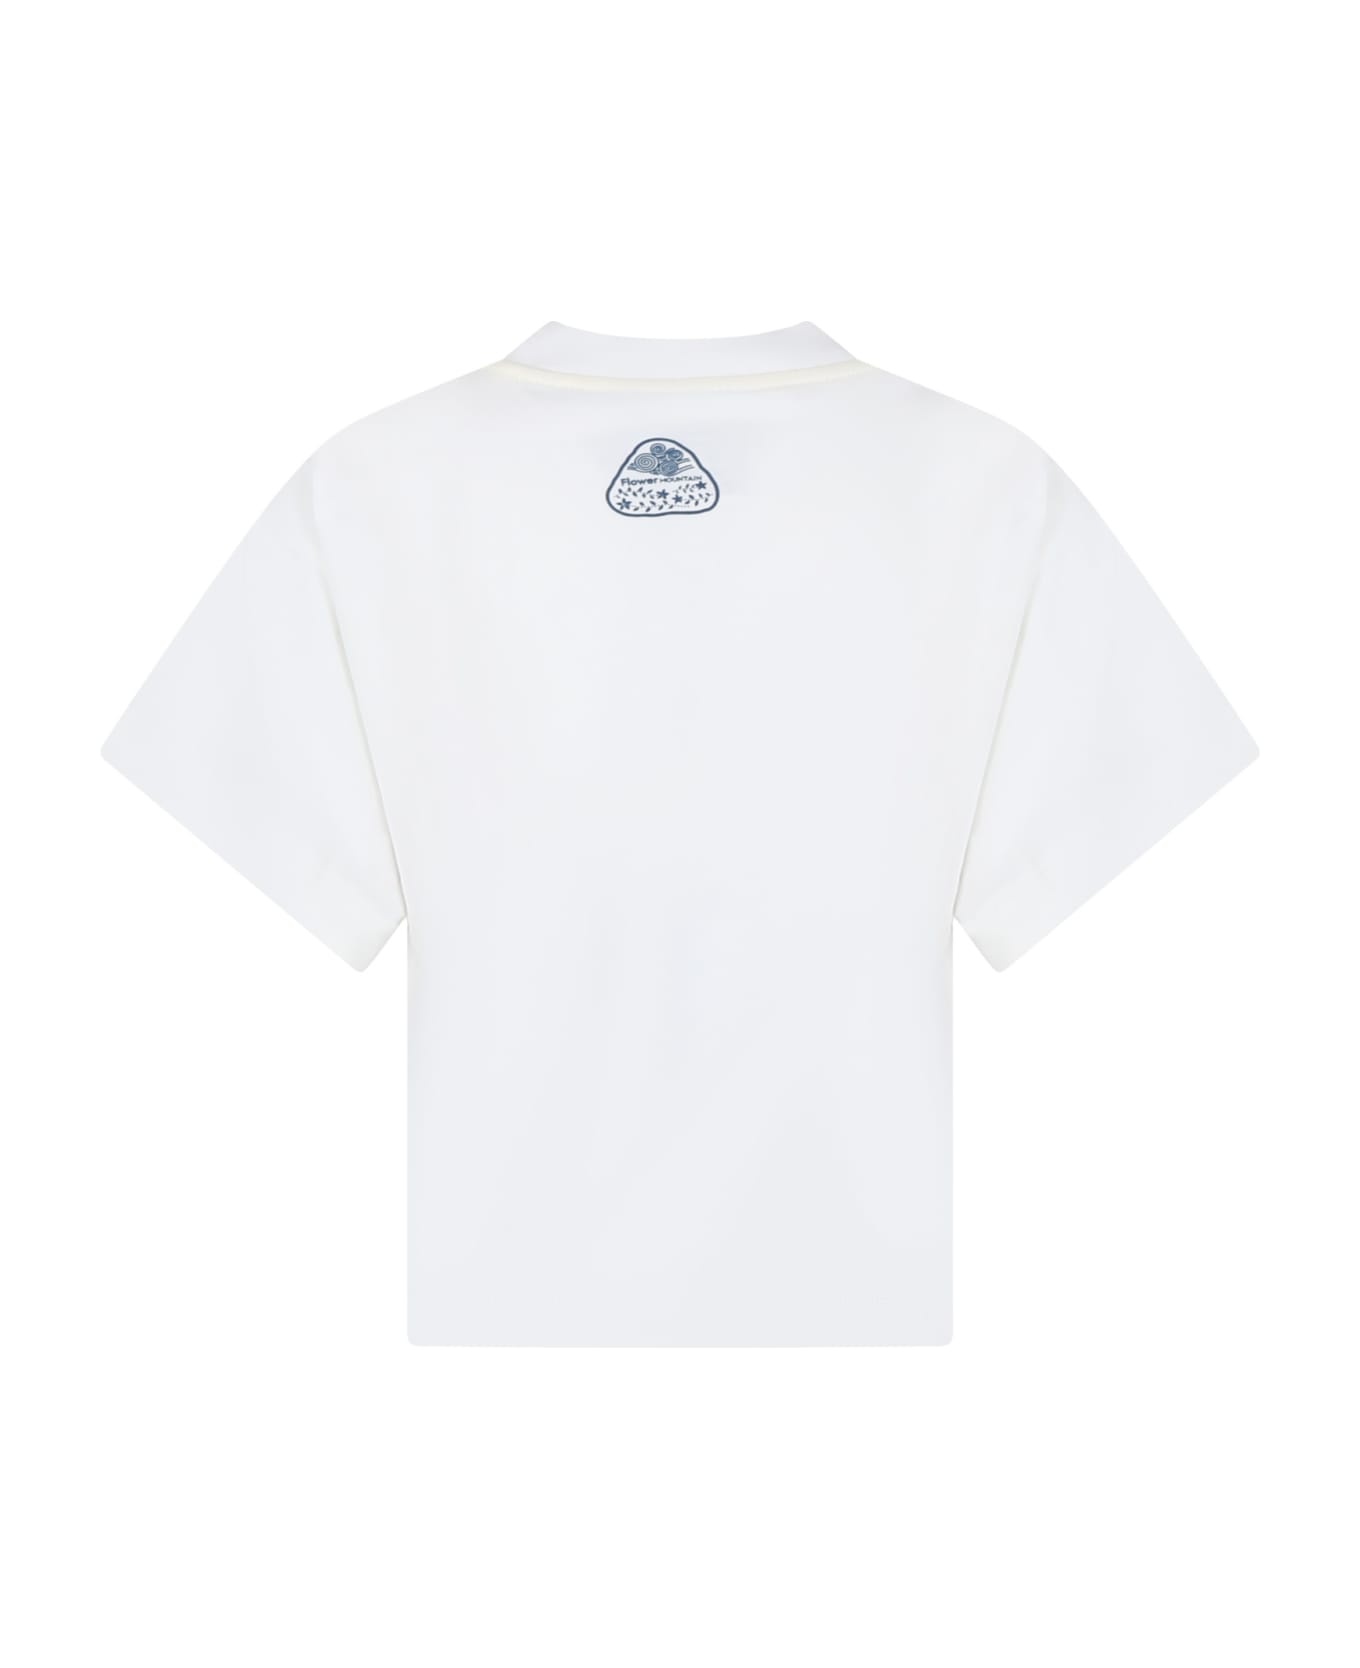 Flower Mountain White T-shirt For Kids With Print - White